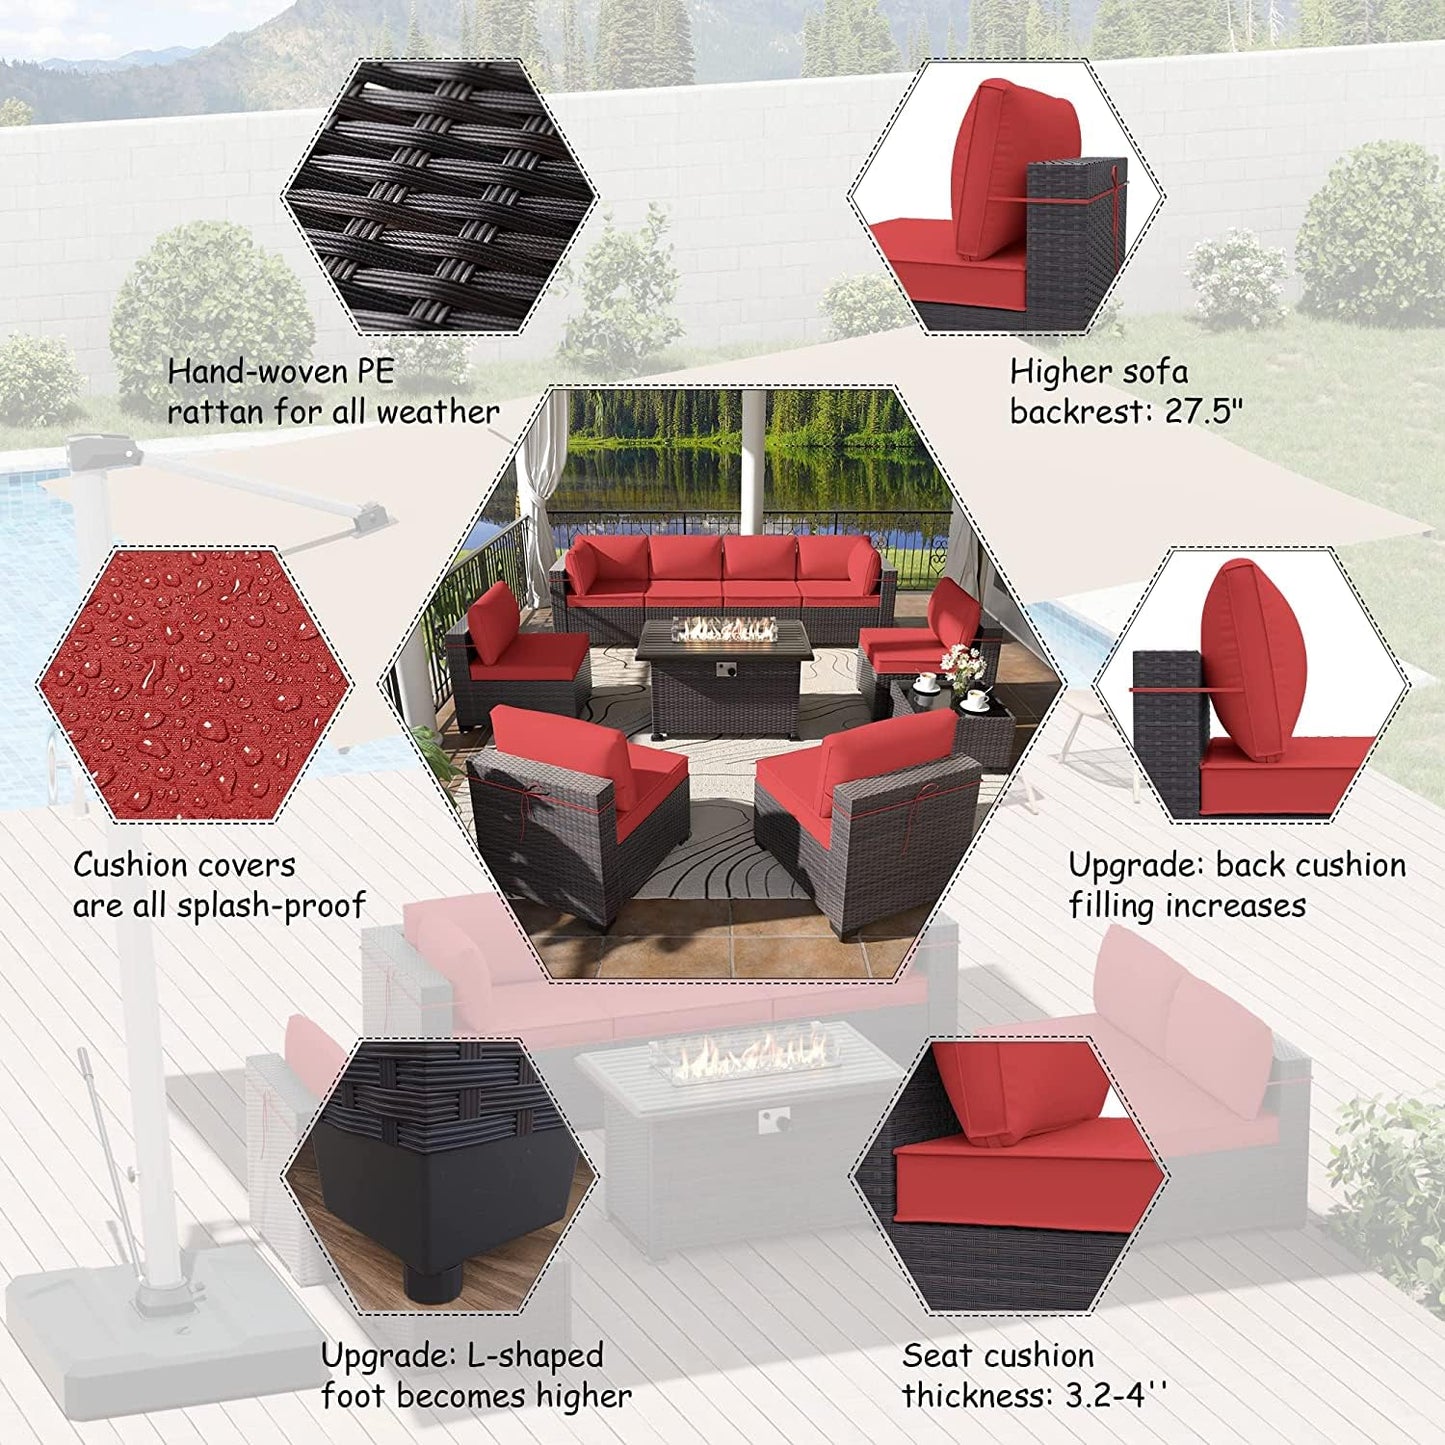 ALAULM 10 Pieces Patio Furniture Set with Propane Fire Pit Table Outdoor Sectional Sofa Sets Patio Furniture